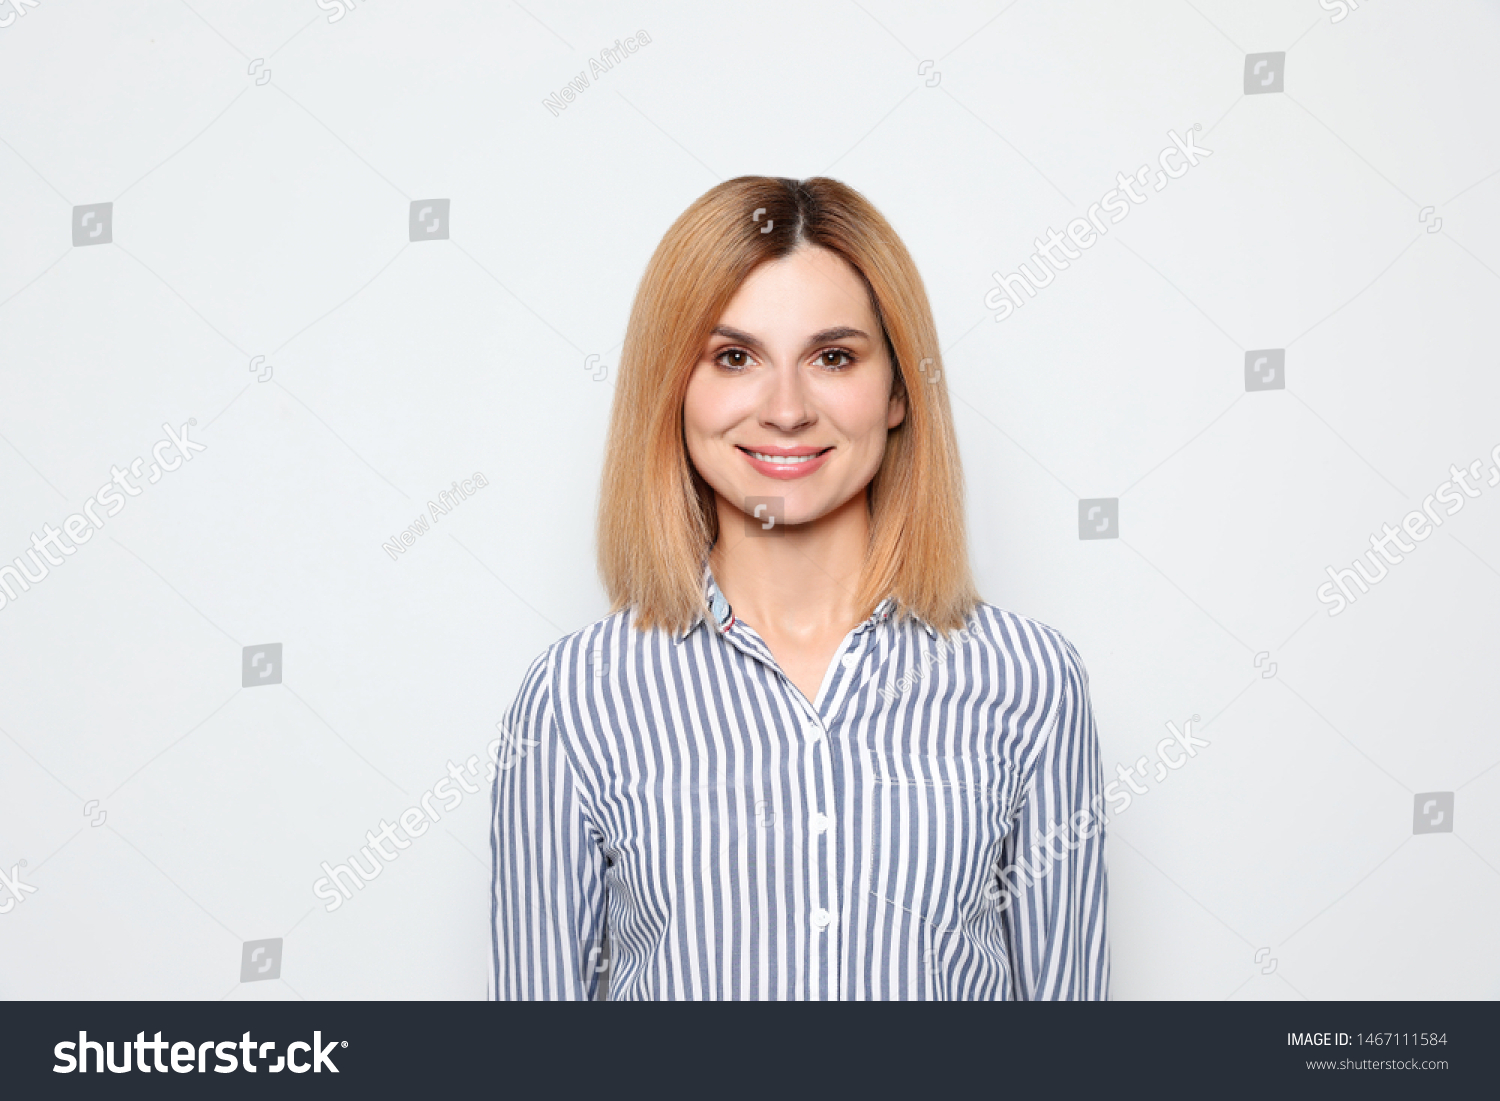 Portrait of woman with beautiful face on white background #1467111584